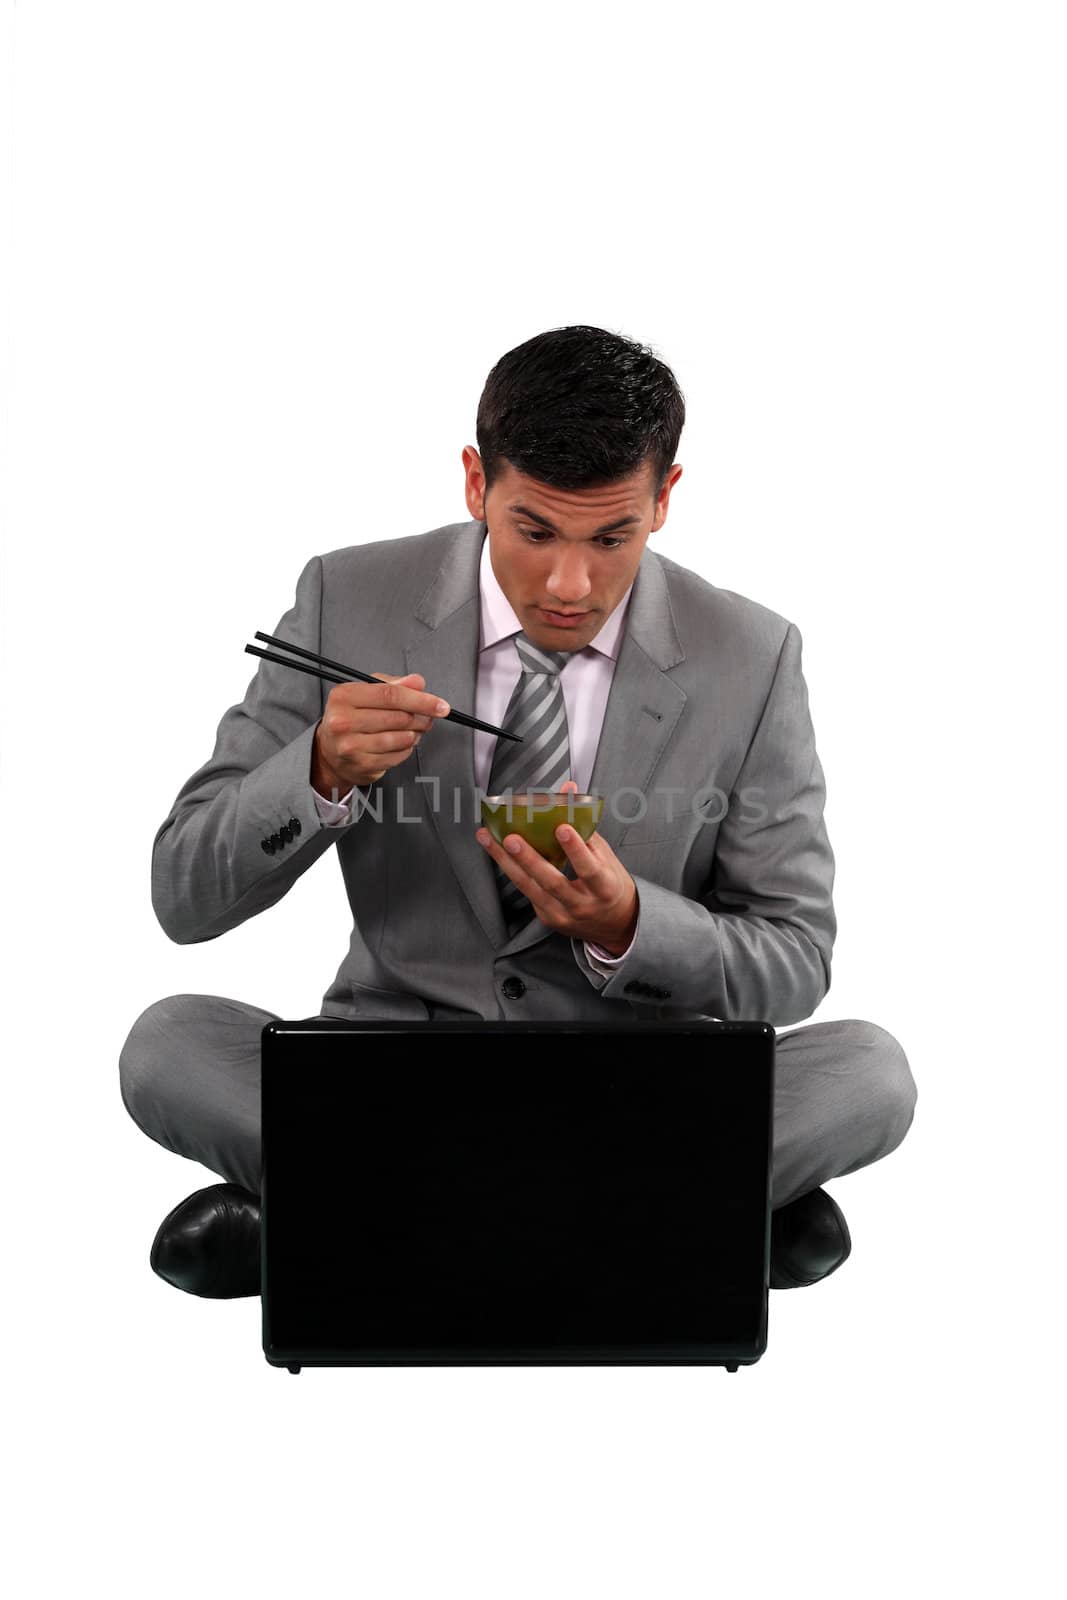 Man eating with chopsticks by phovoir